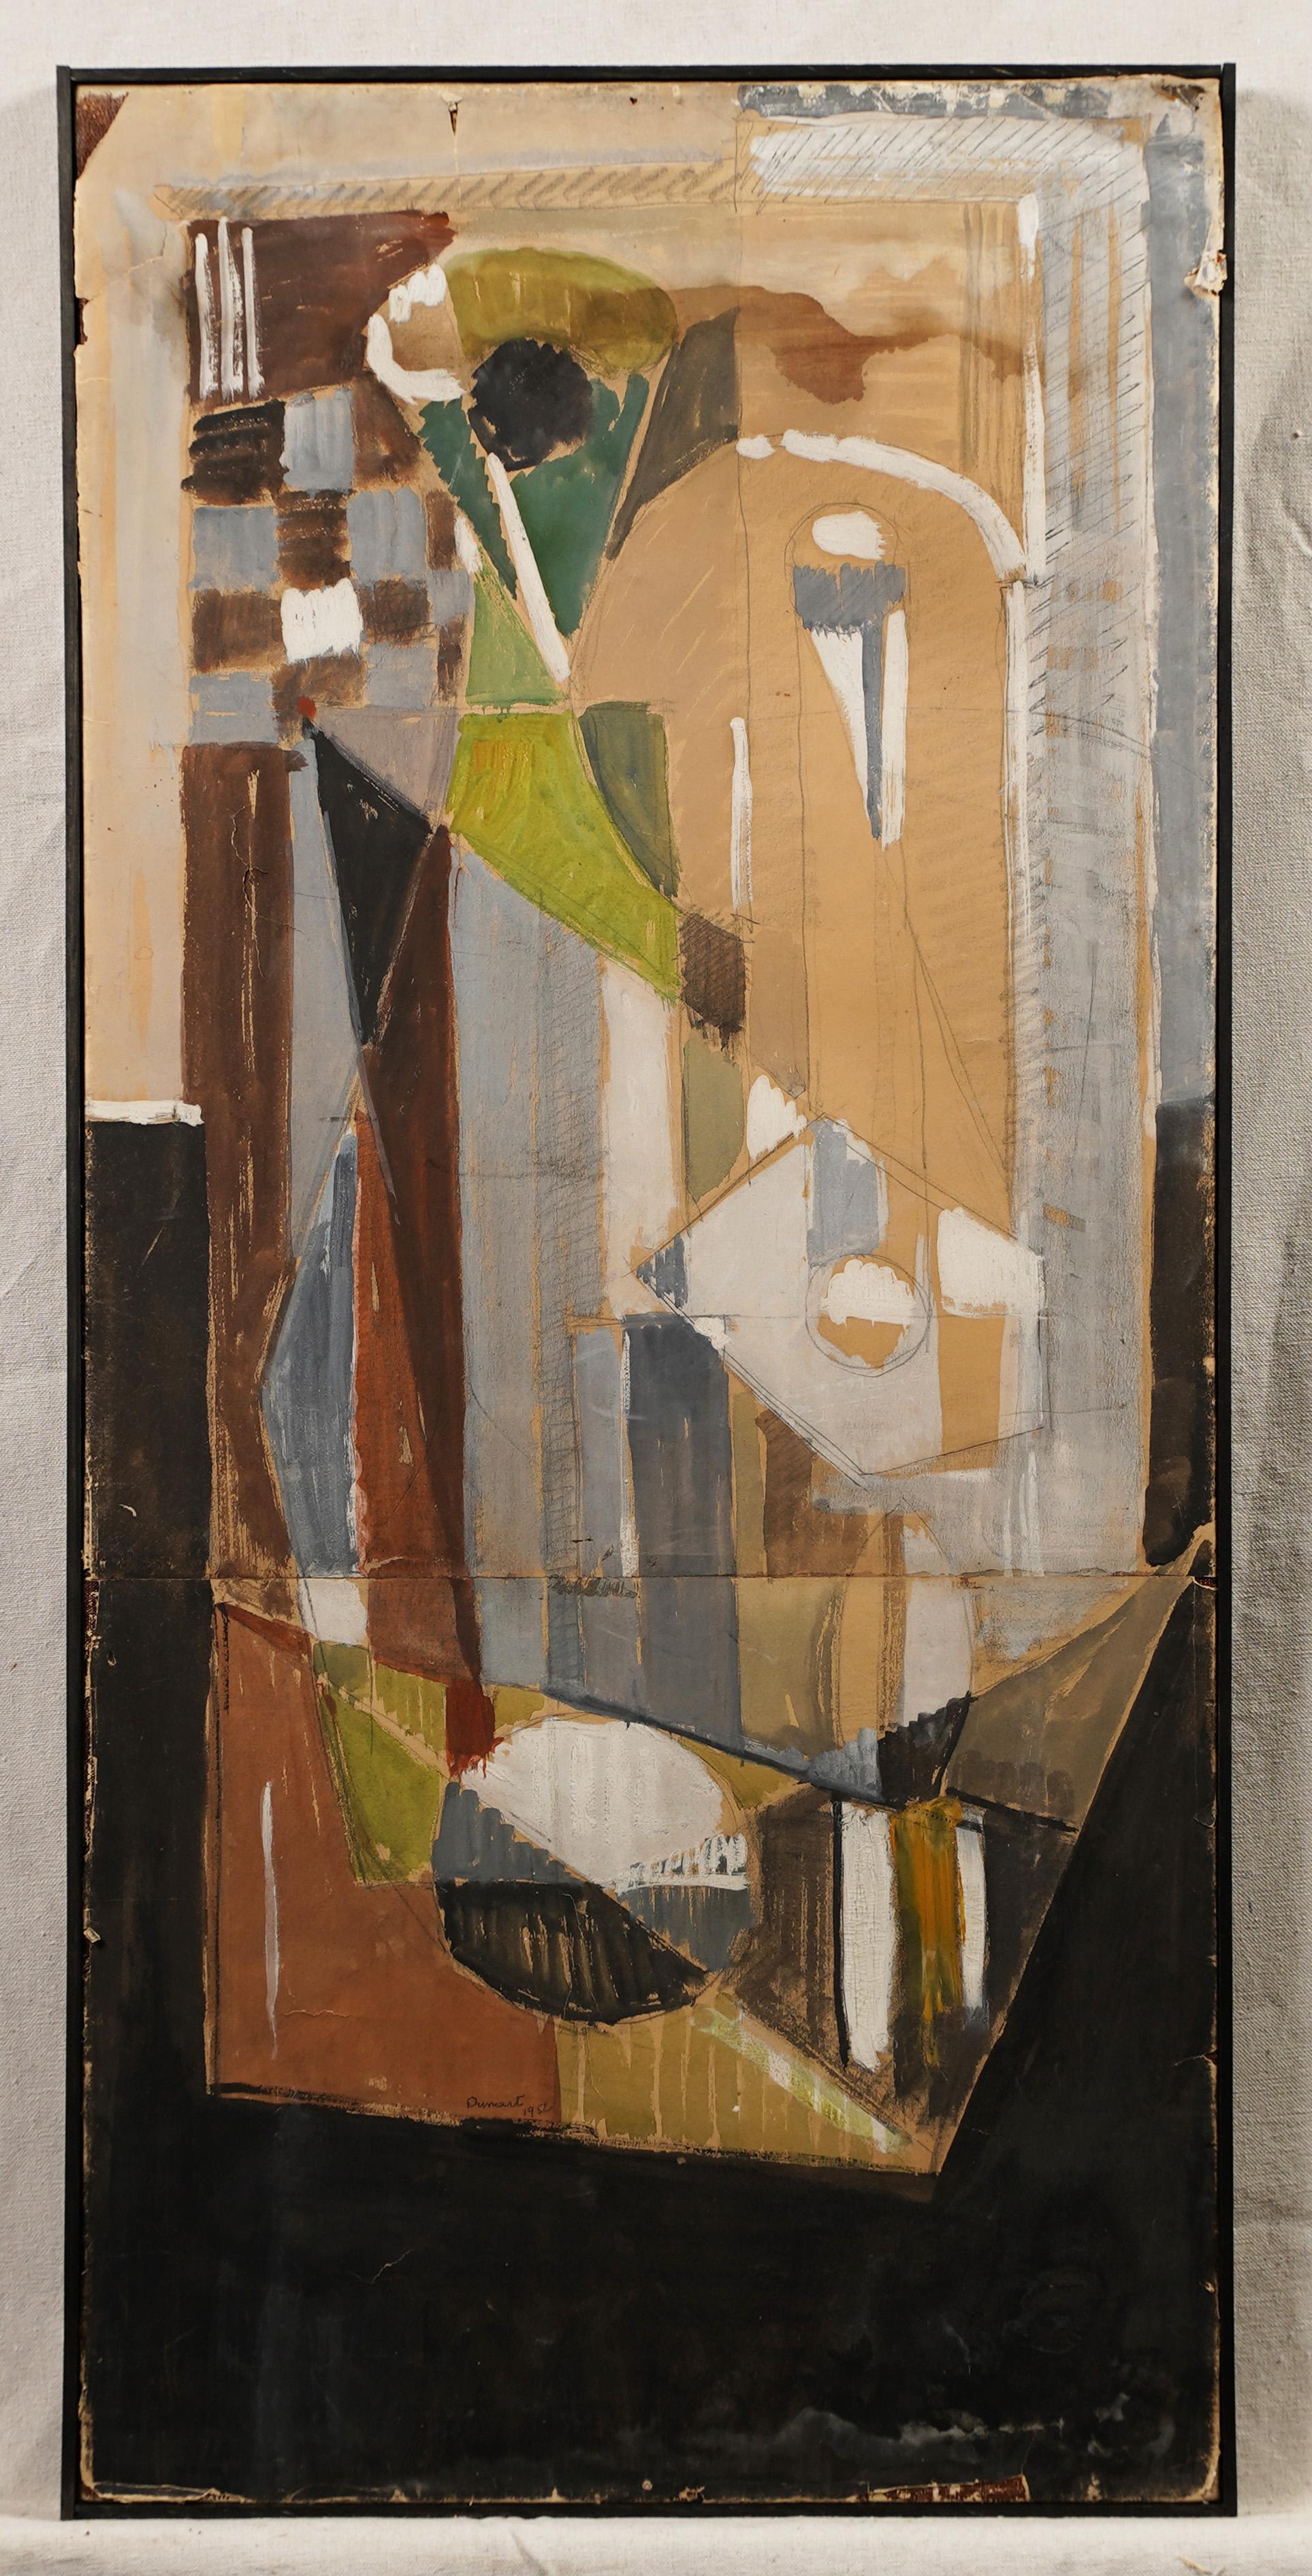 Antique French cubist abstract still life oil painting.  Oil and gouache on paper.  Framed.  Signed Image size, 19L x 42H.